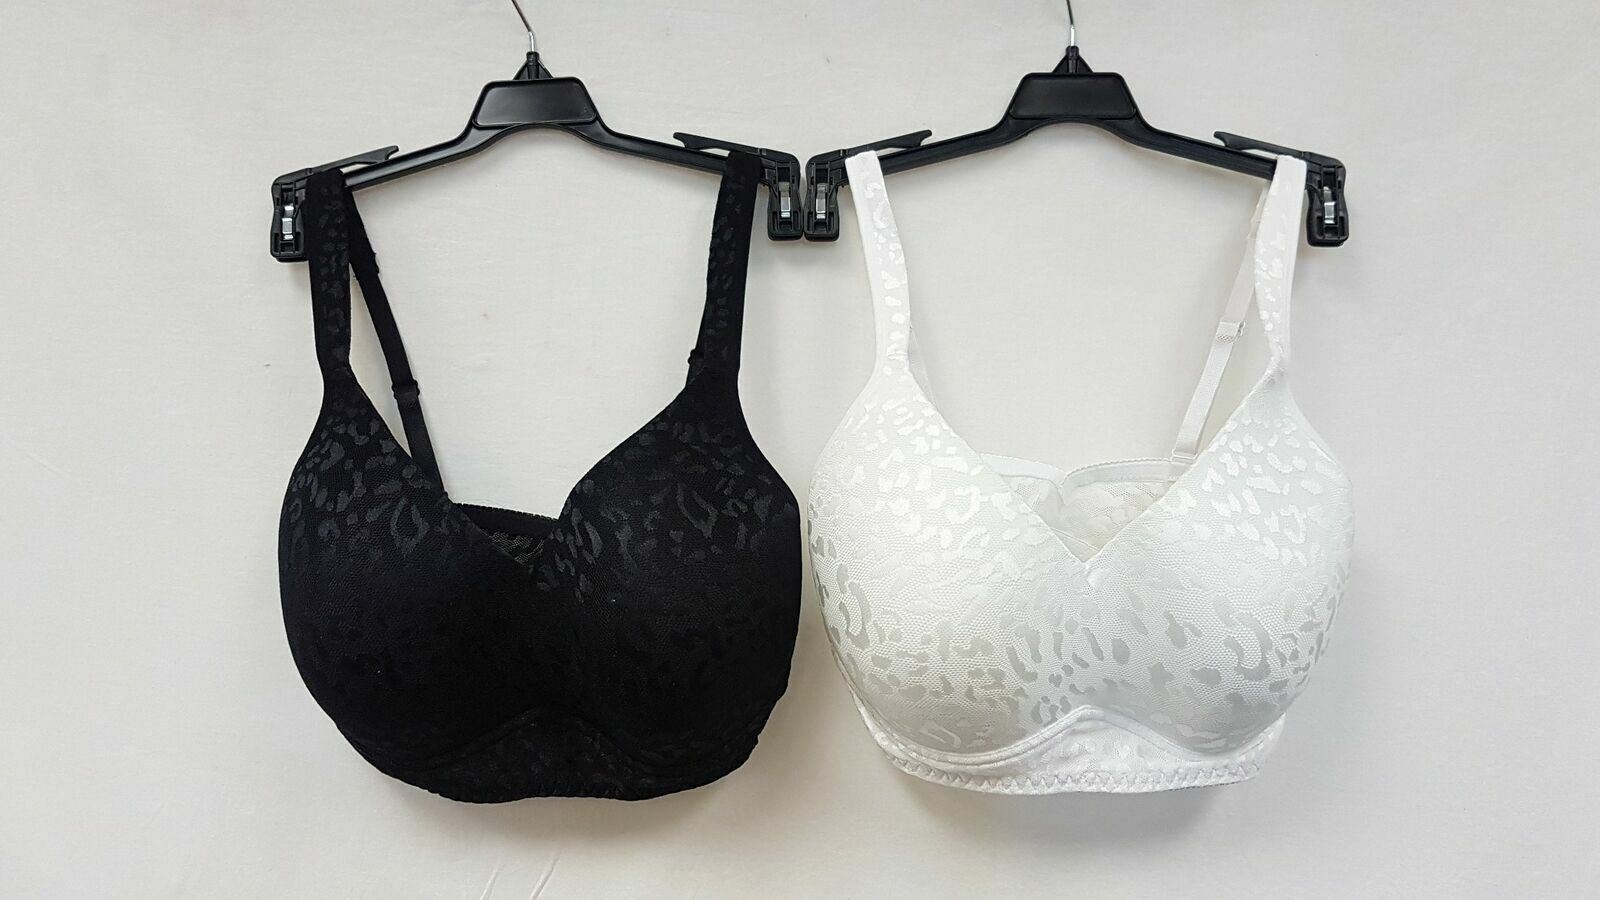 Rhonda Shear 2pack Lace Molded Cup Bra with Back Closure 